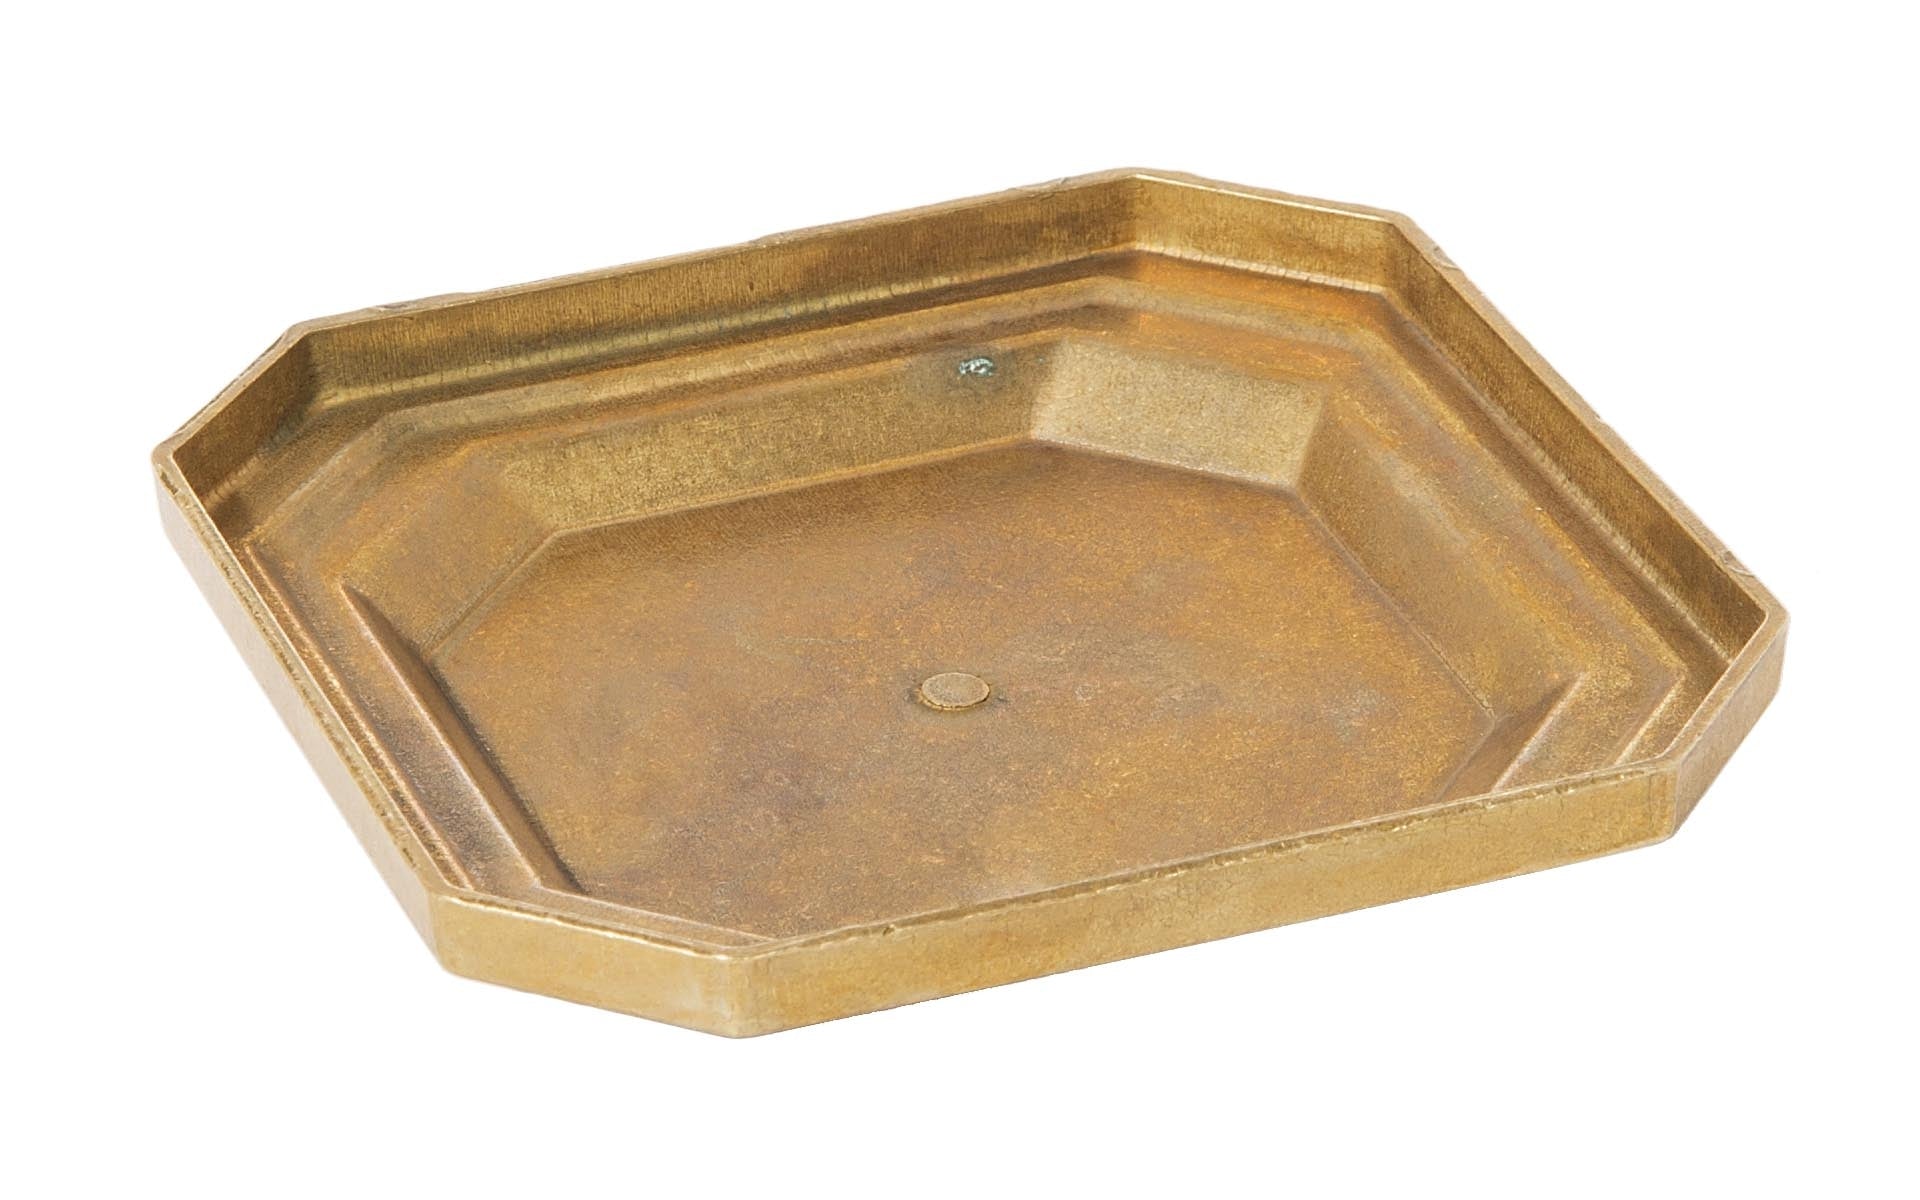 4-7/8 Inch Wide Square Unfinished Die Cast Brass Back-plate or Canopy, No Center Hole